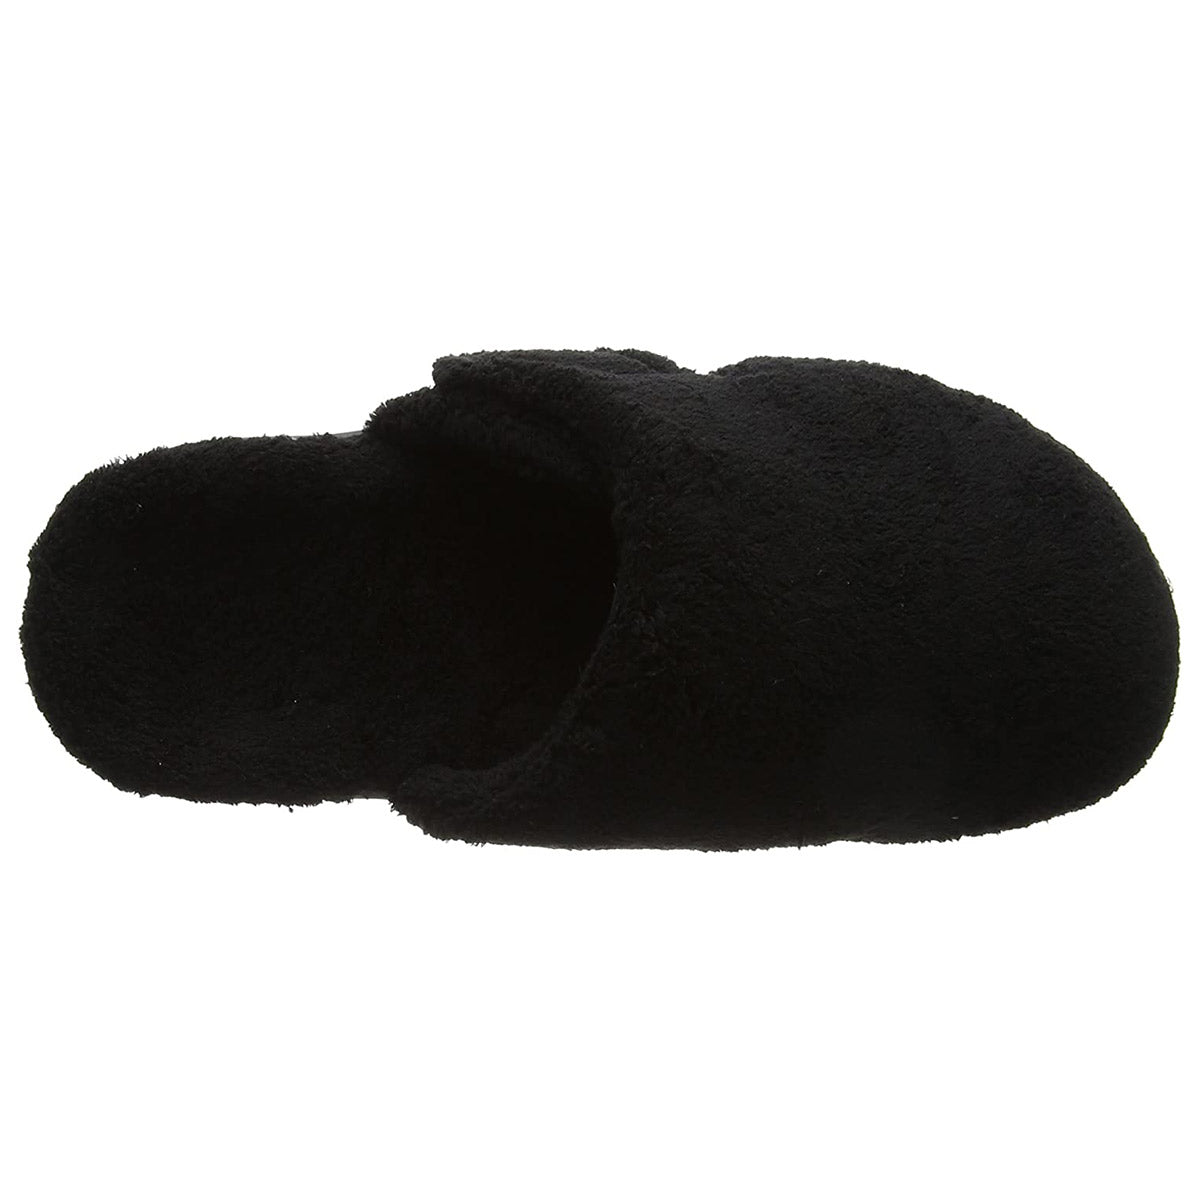 A black, fluffy Vionic women&#39;s slipper without a heel, viewed from above, offering excellent arch support. The product is named VIONIC GEMMA BLACK - WOMENS.